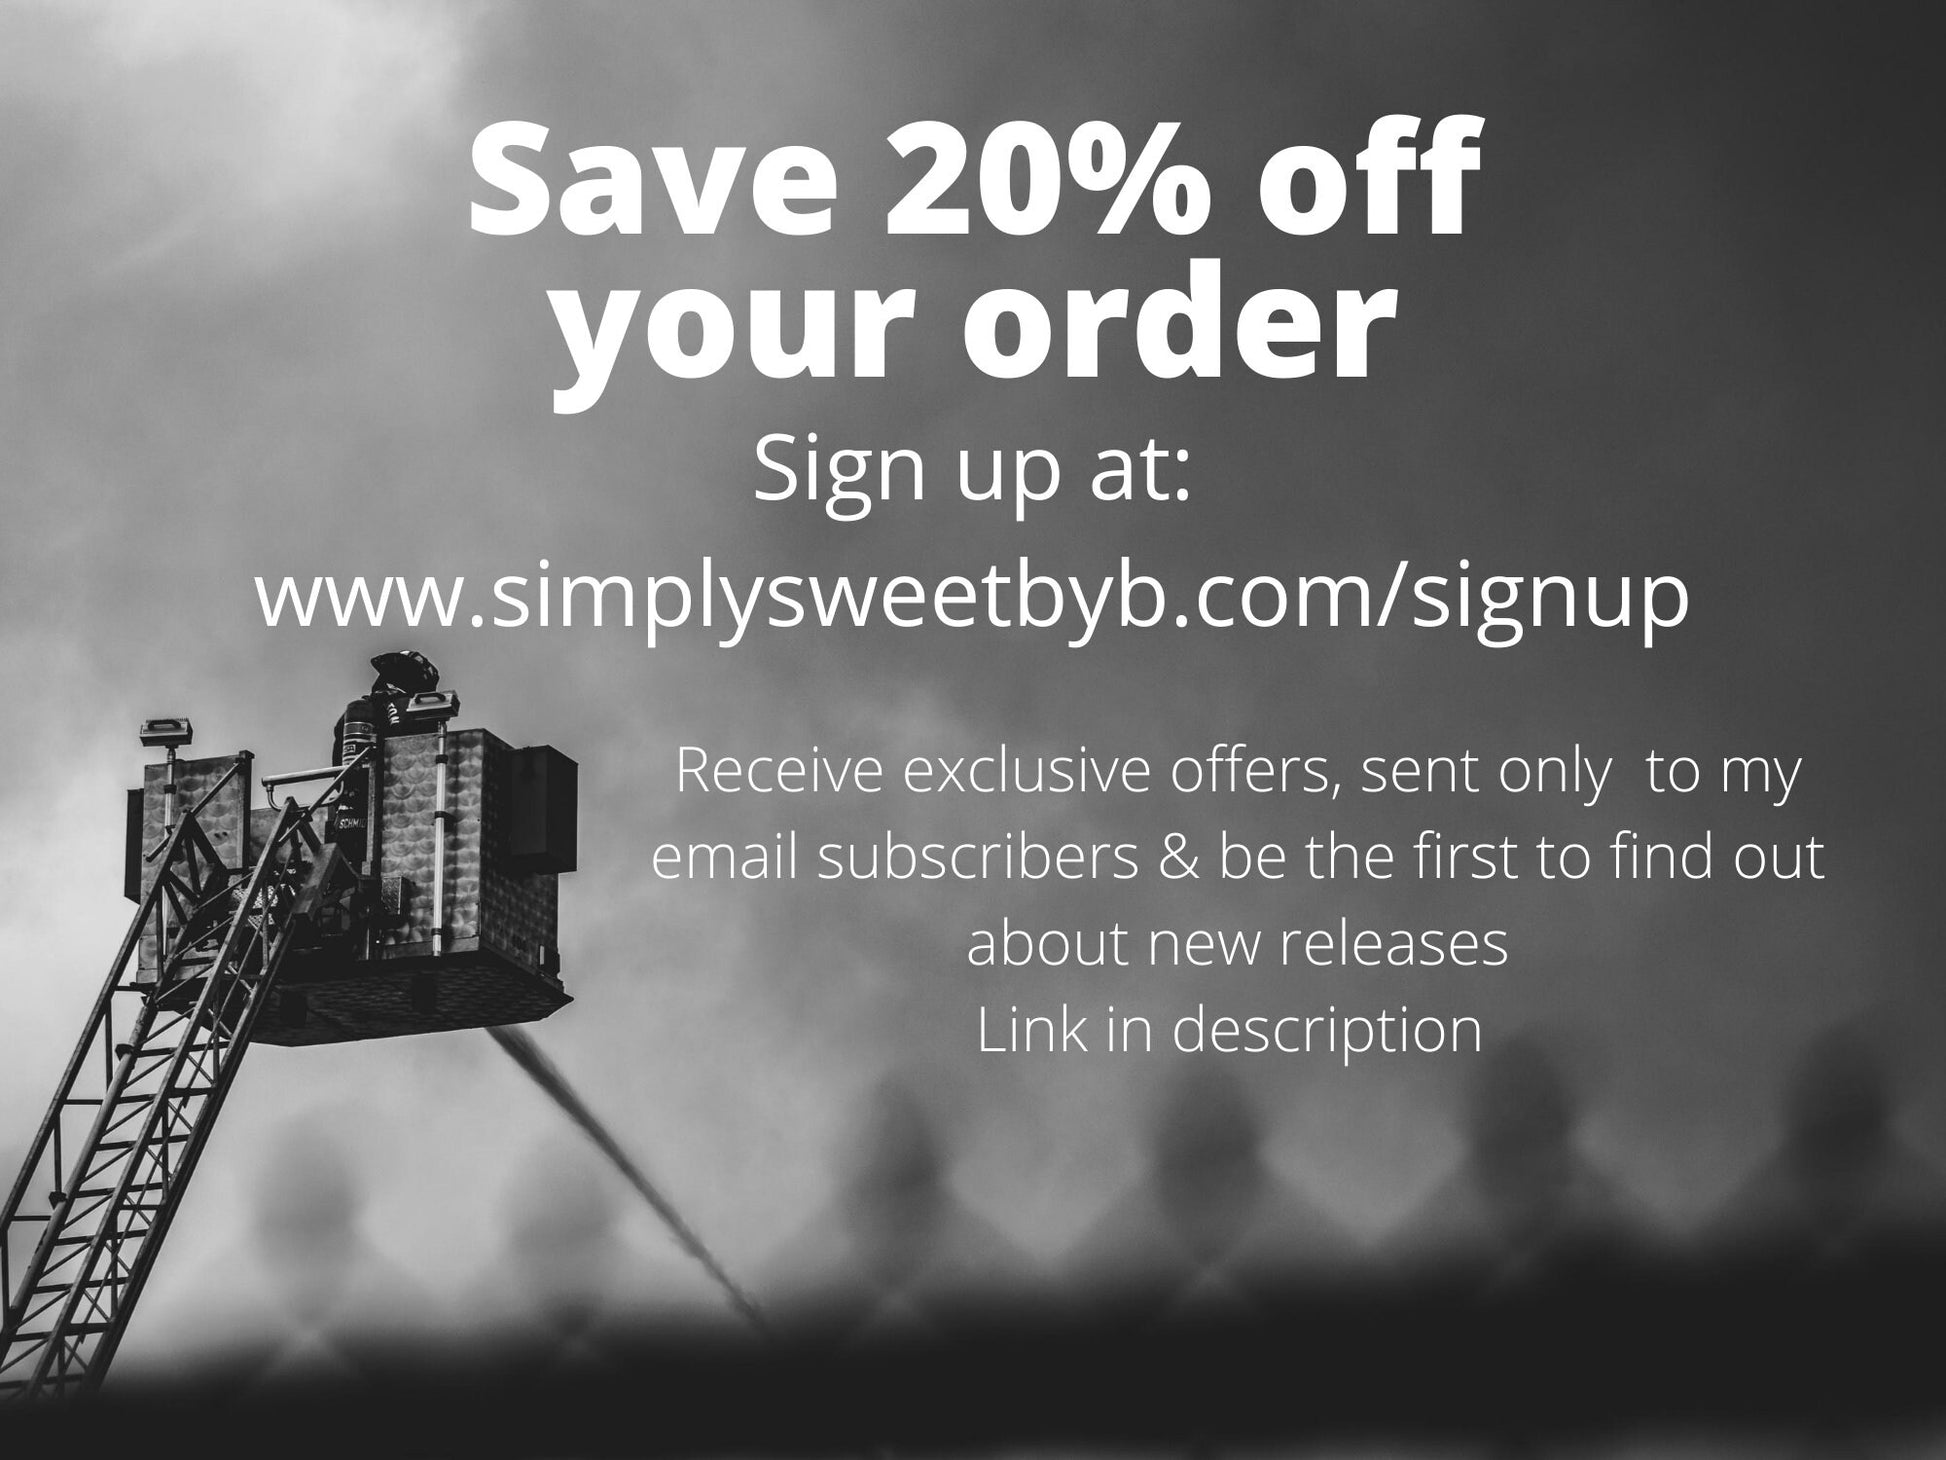 save 20% sign up for email list